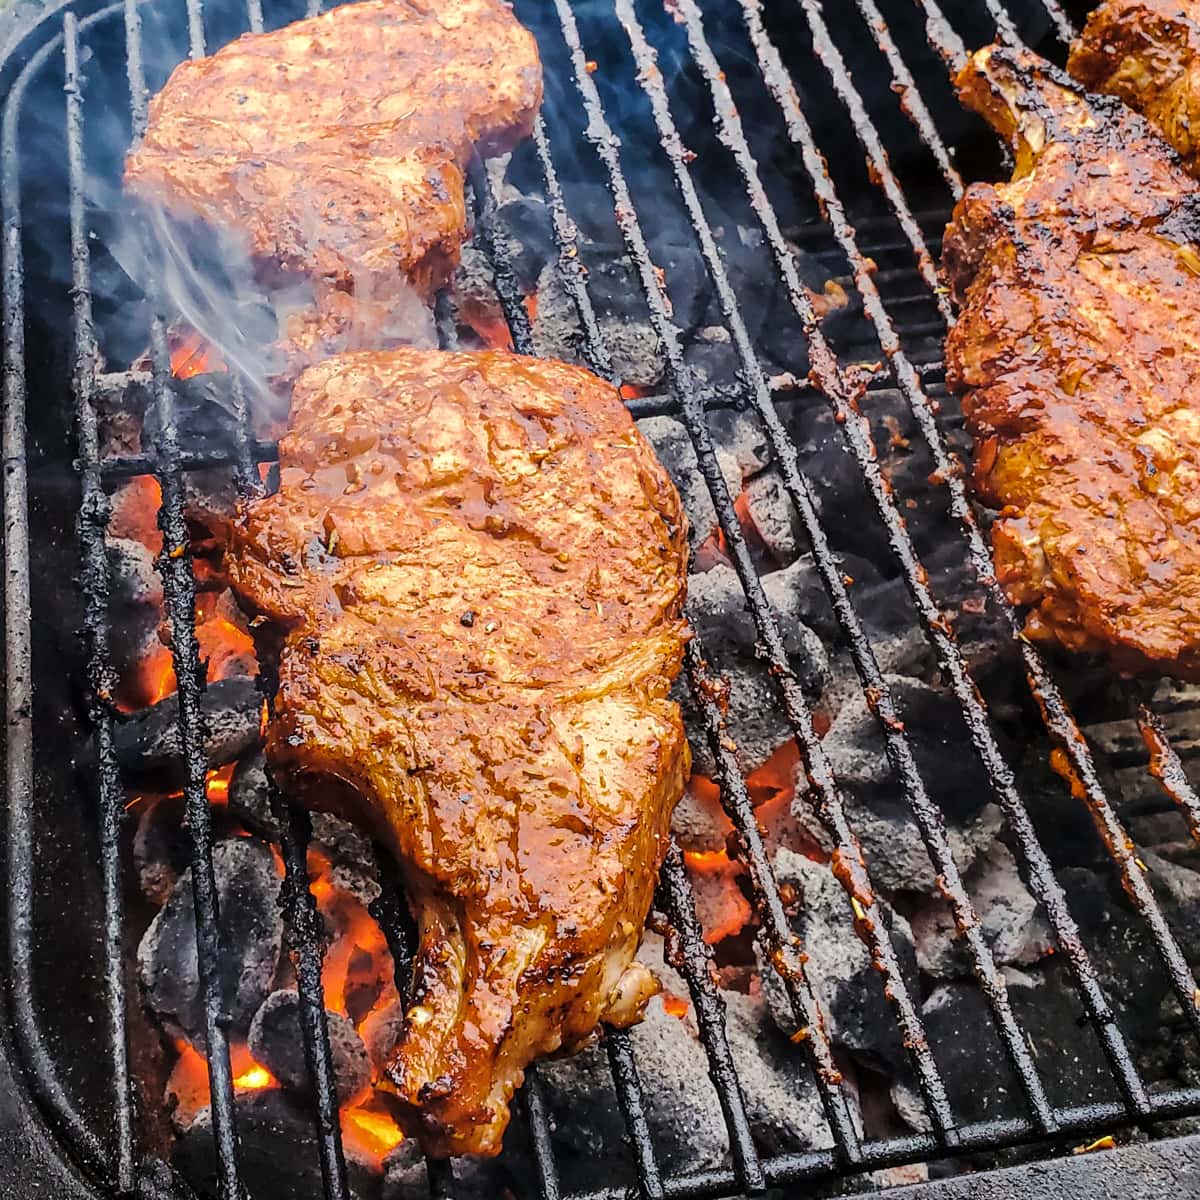 Tomahawk Pork Chops grilling on a PK Grill.